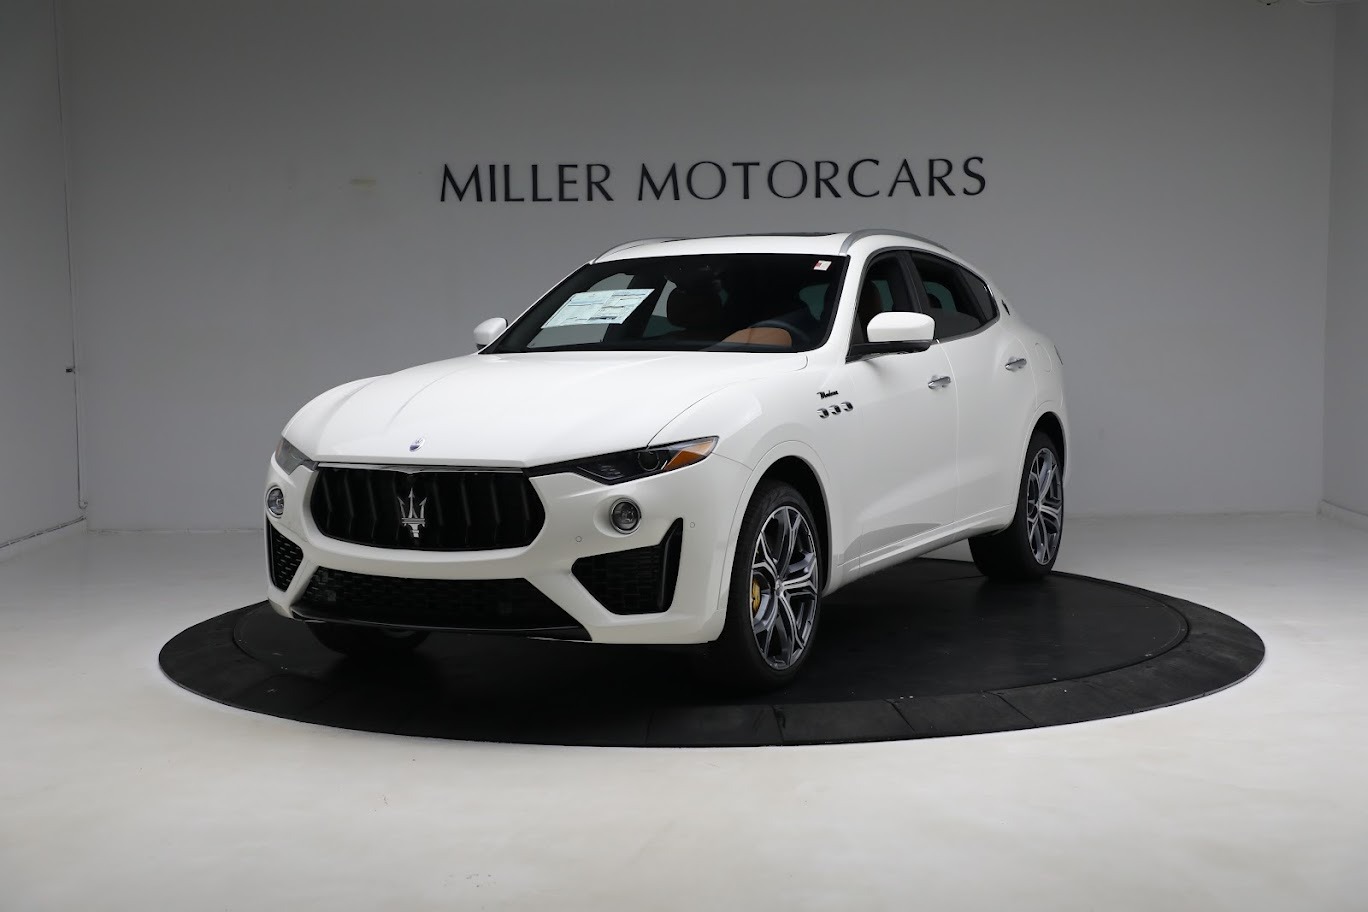 New 2023 Maserati Levante Modena for sale Sold at Rolls-Royce Motor Cars Greenwich in Greenwich CT 06830 1